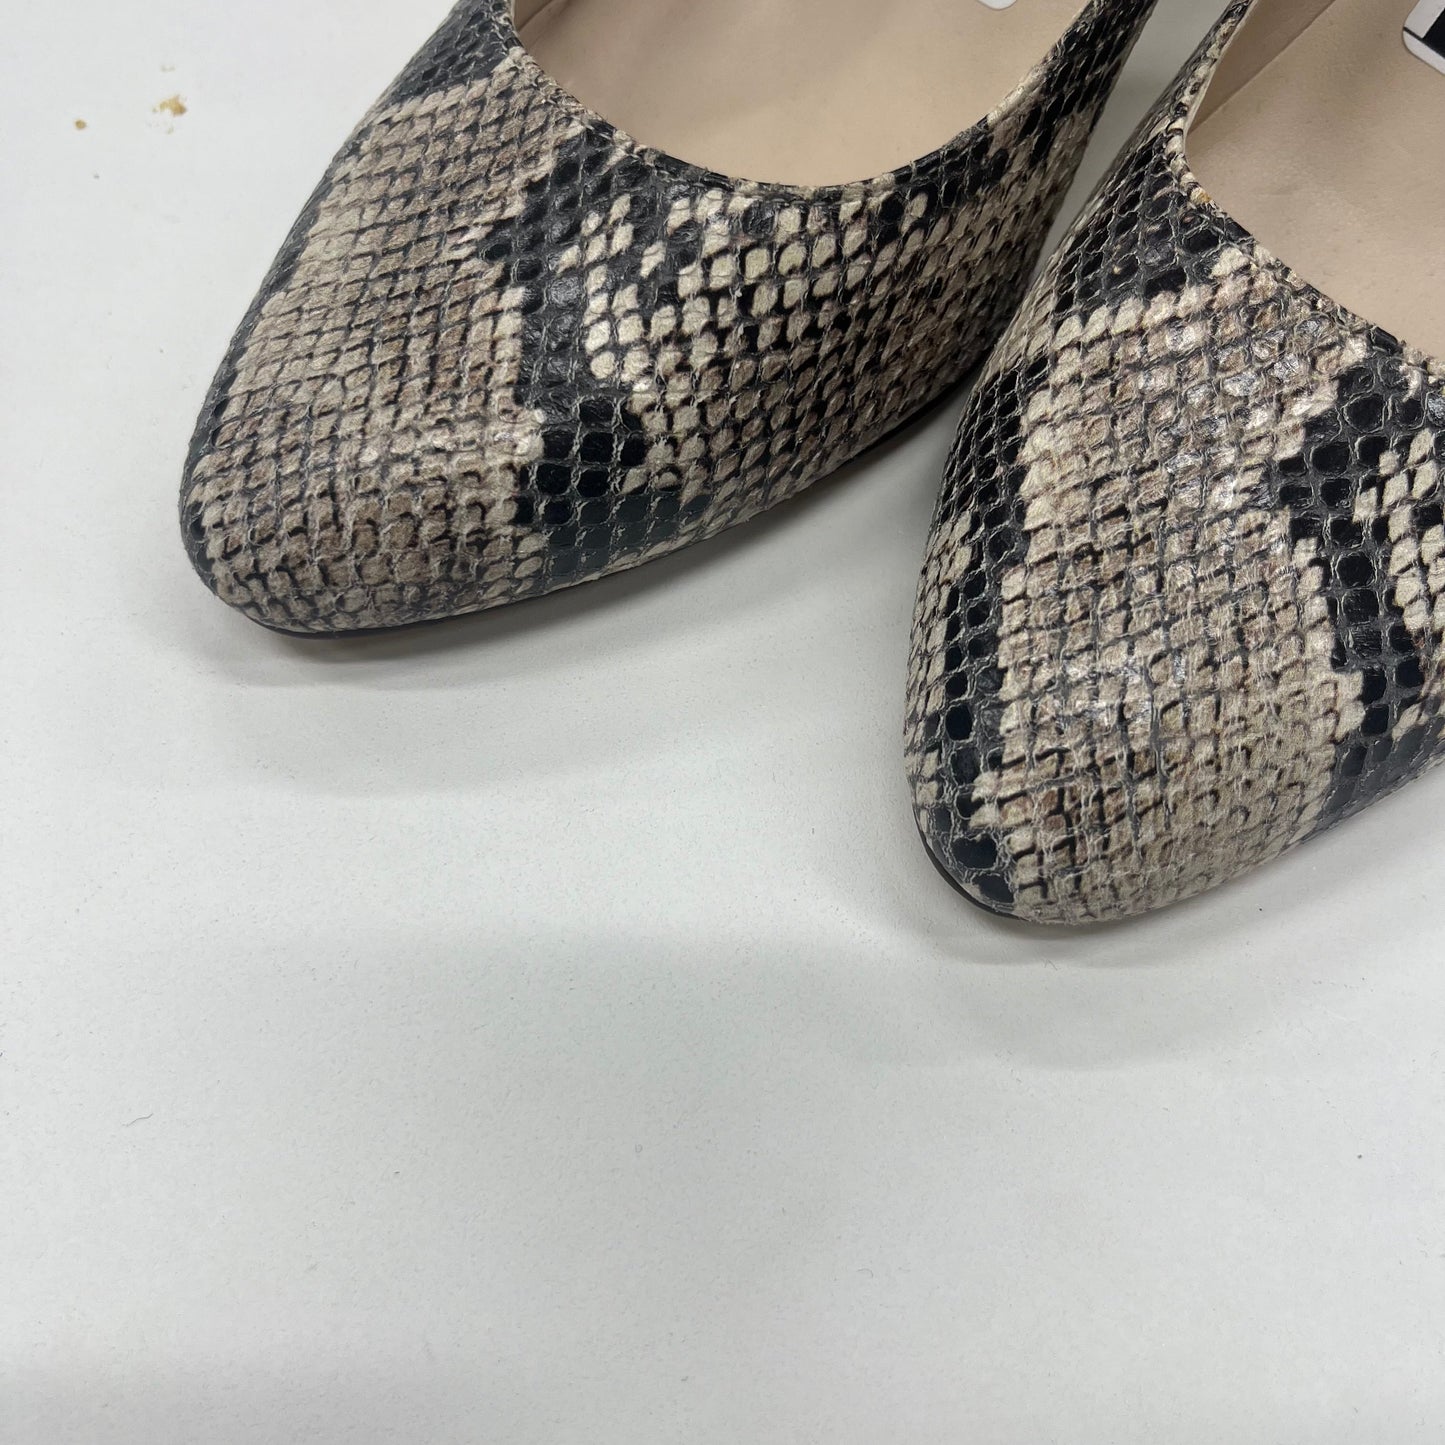 Animal Print Shoes Heels D Orsay Cole-haan O, Size 6.5